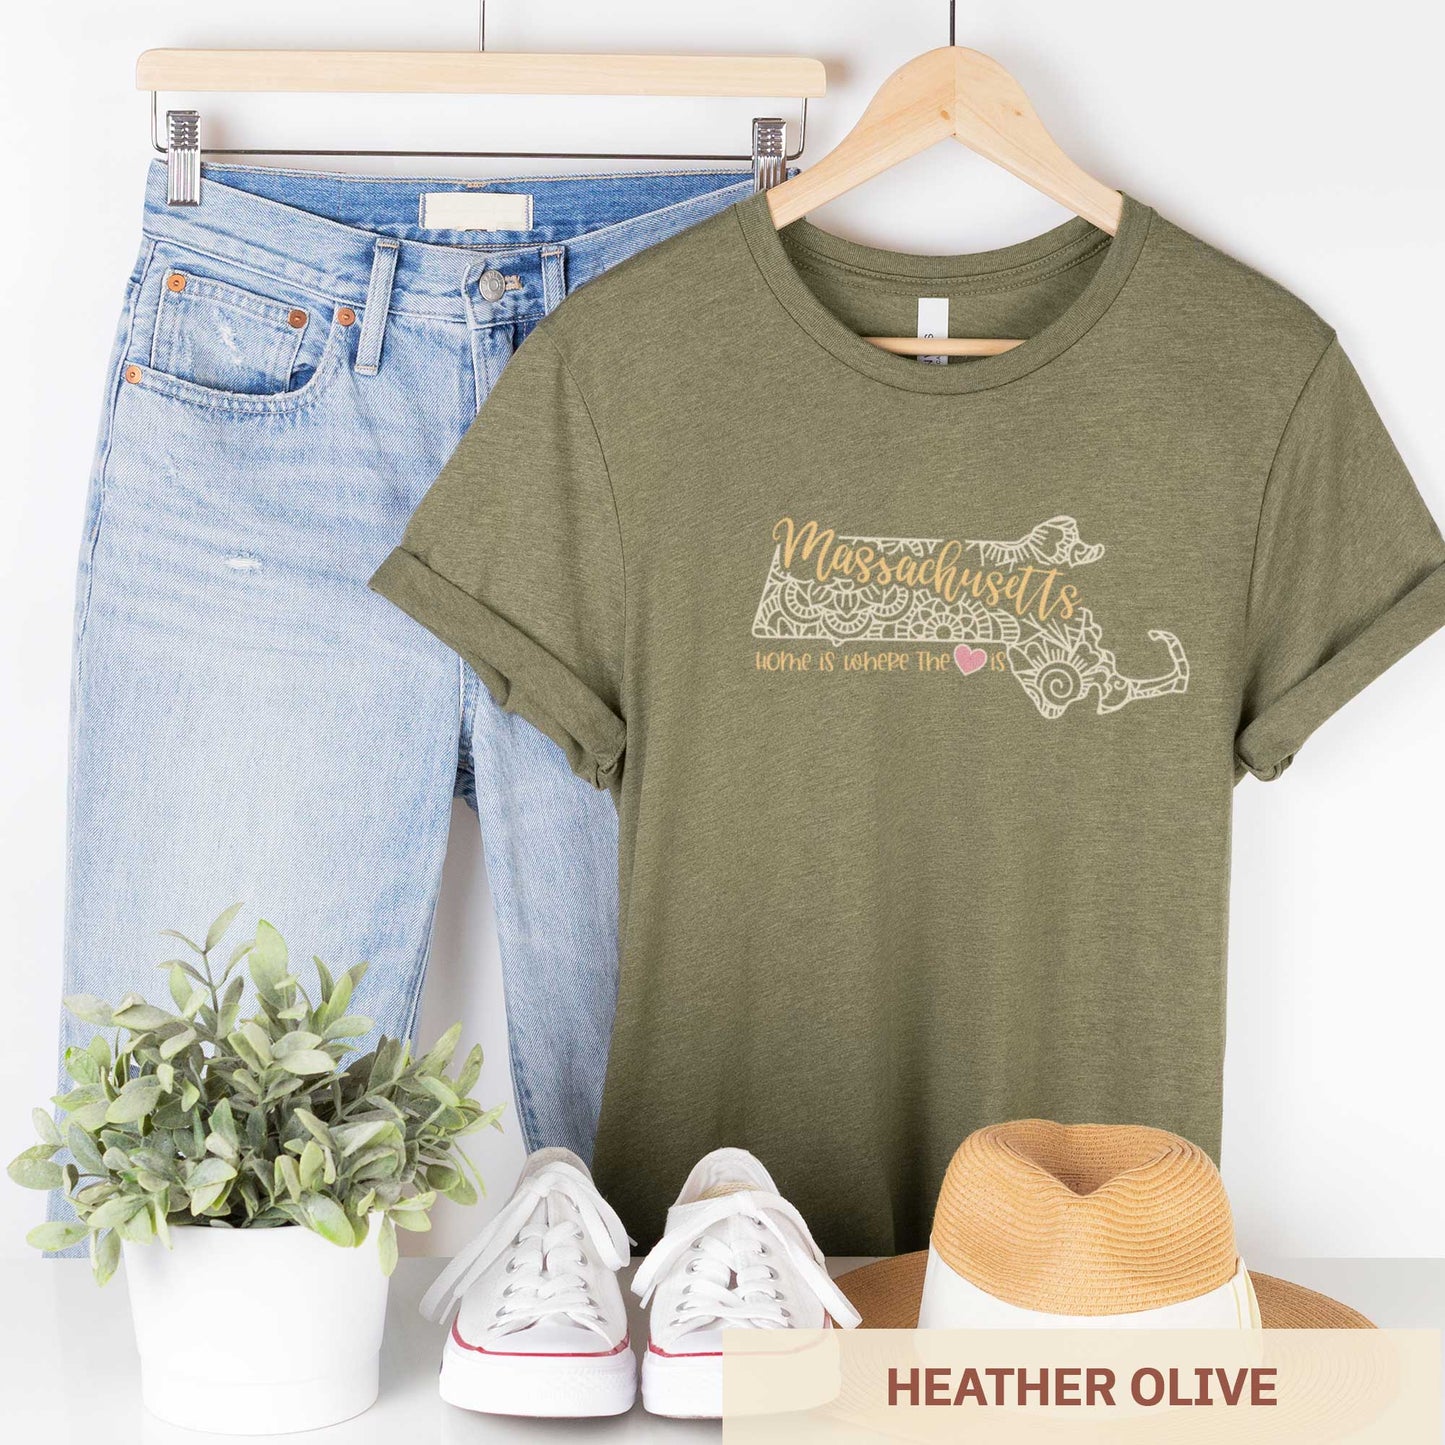 A hanging heather olive Bella Canvas t-shirt featuring a mandala in the shape of Massachusetts with the words home is where the heart is.